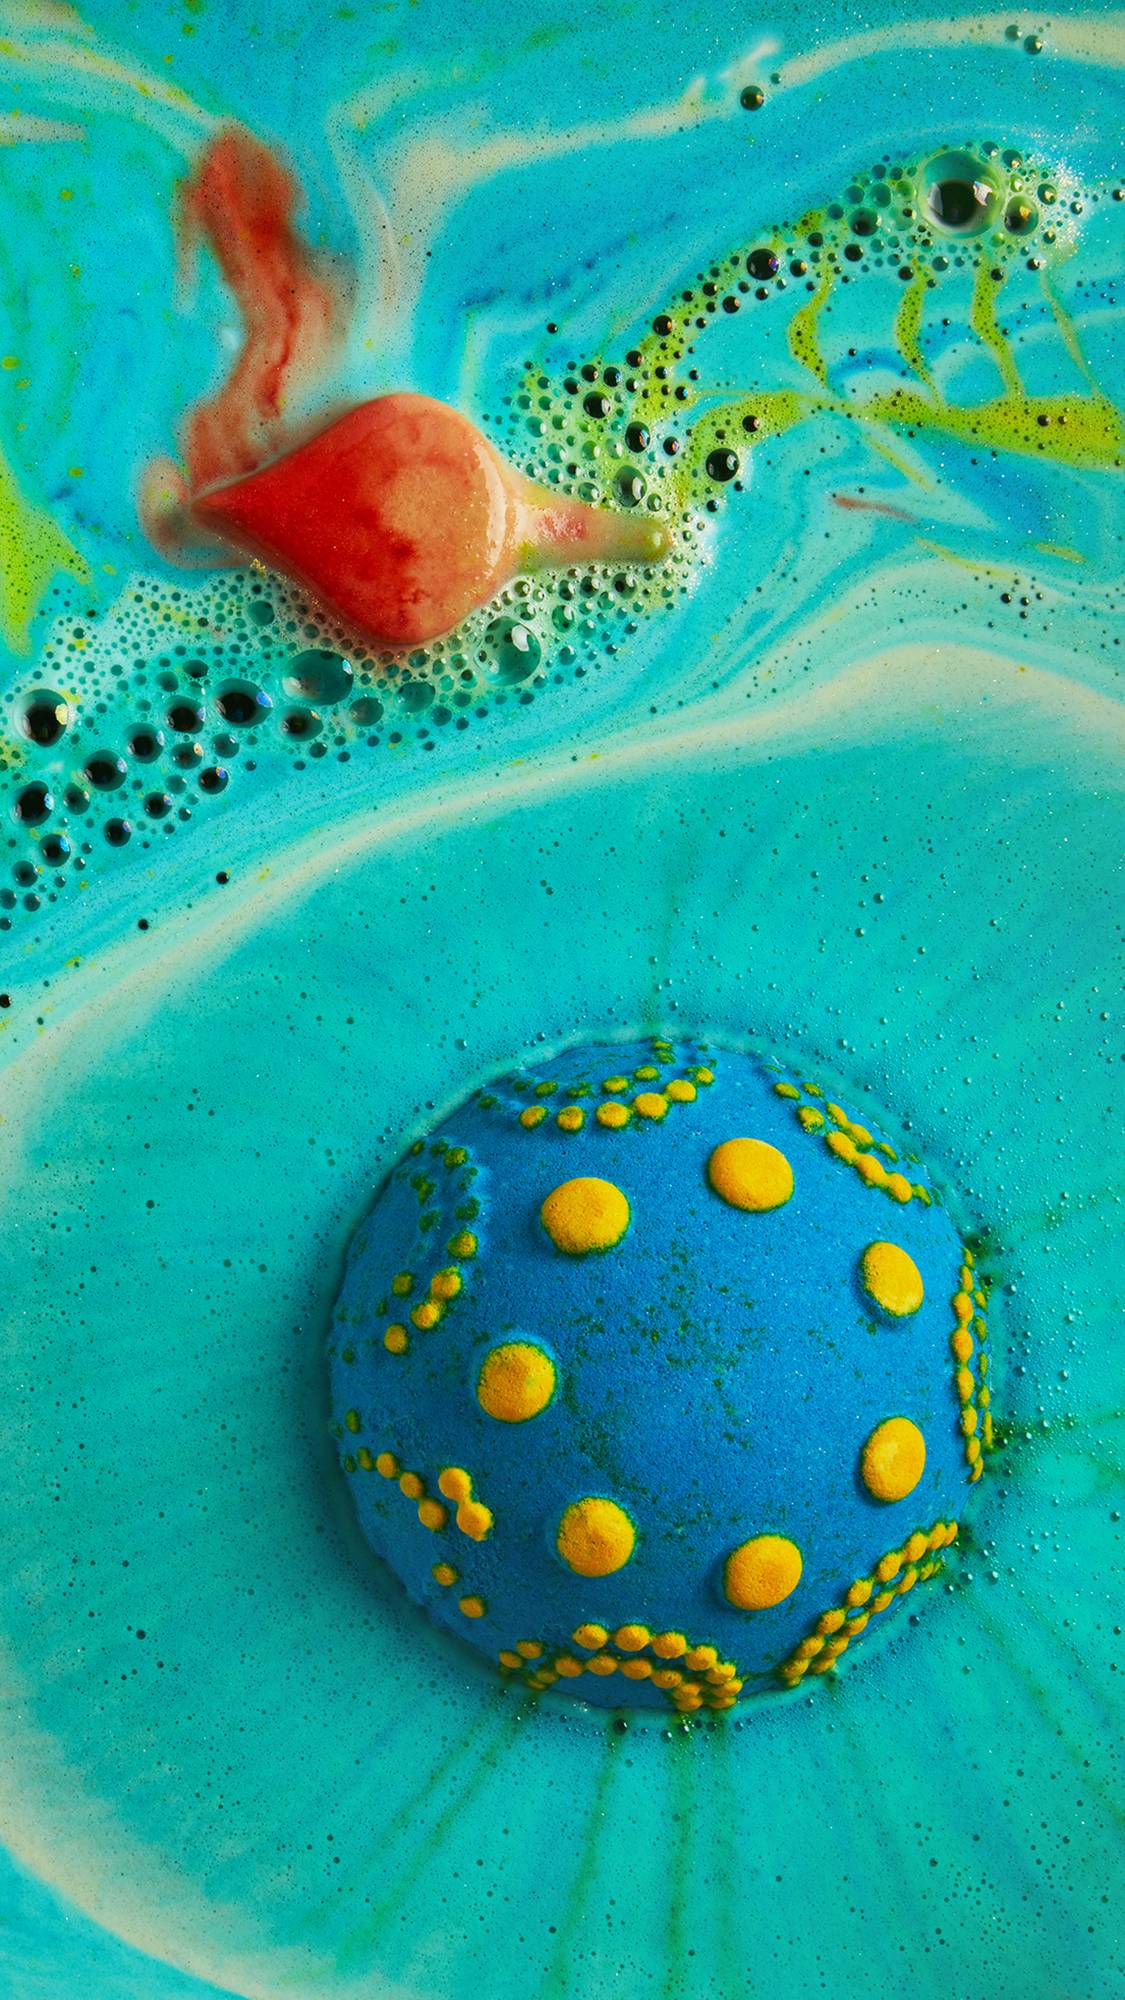 Diya bath bomb's lower segment is floating upside down, showing yellow details as the oil flame melts beside on a sea of foam.